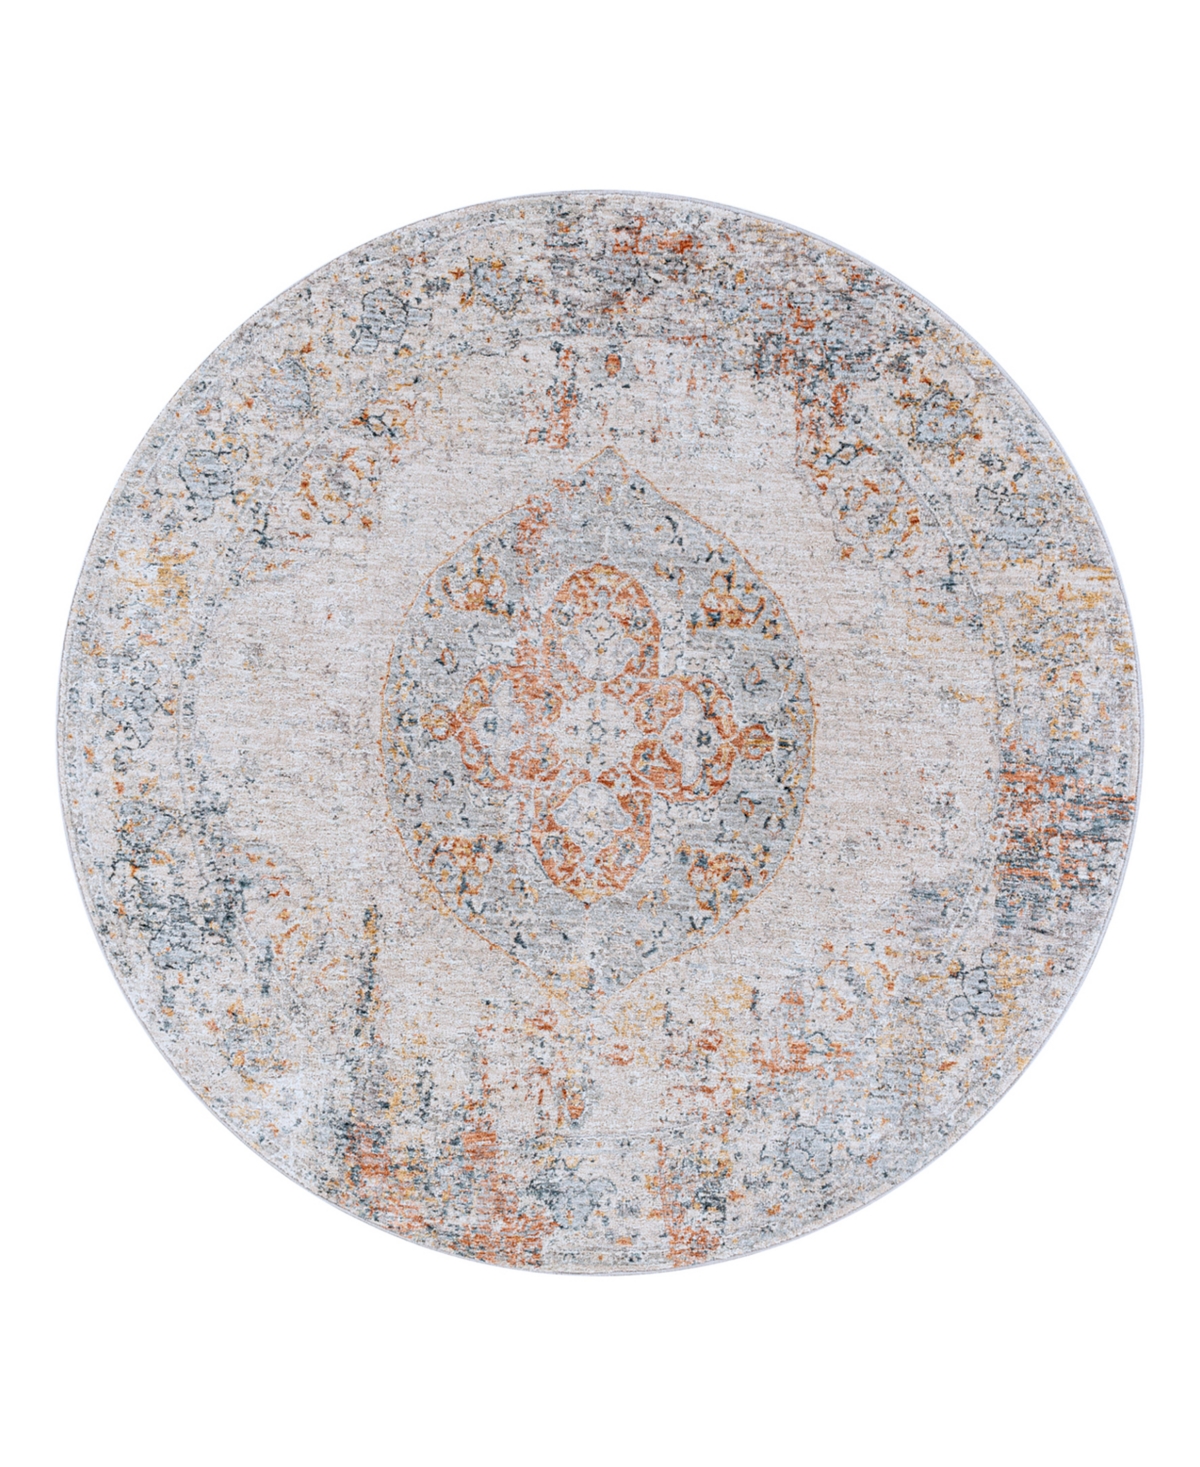 Surya Laila Laa-2306 6'7x6'7 Round Area Rug In Red